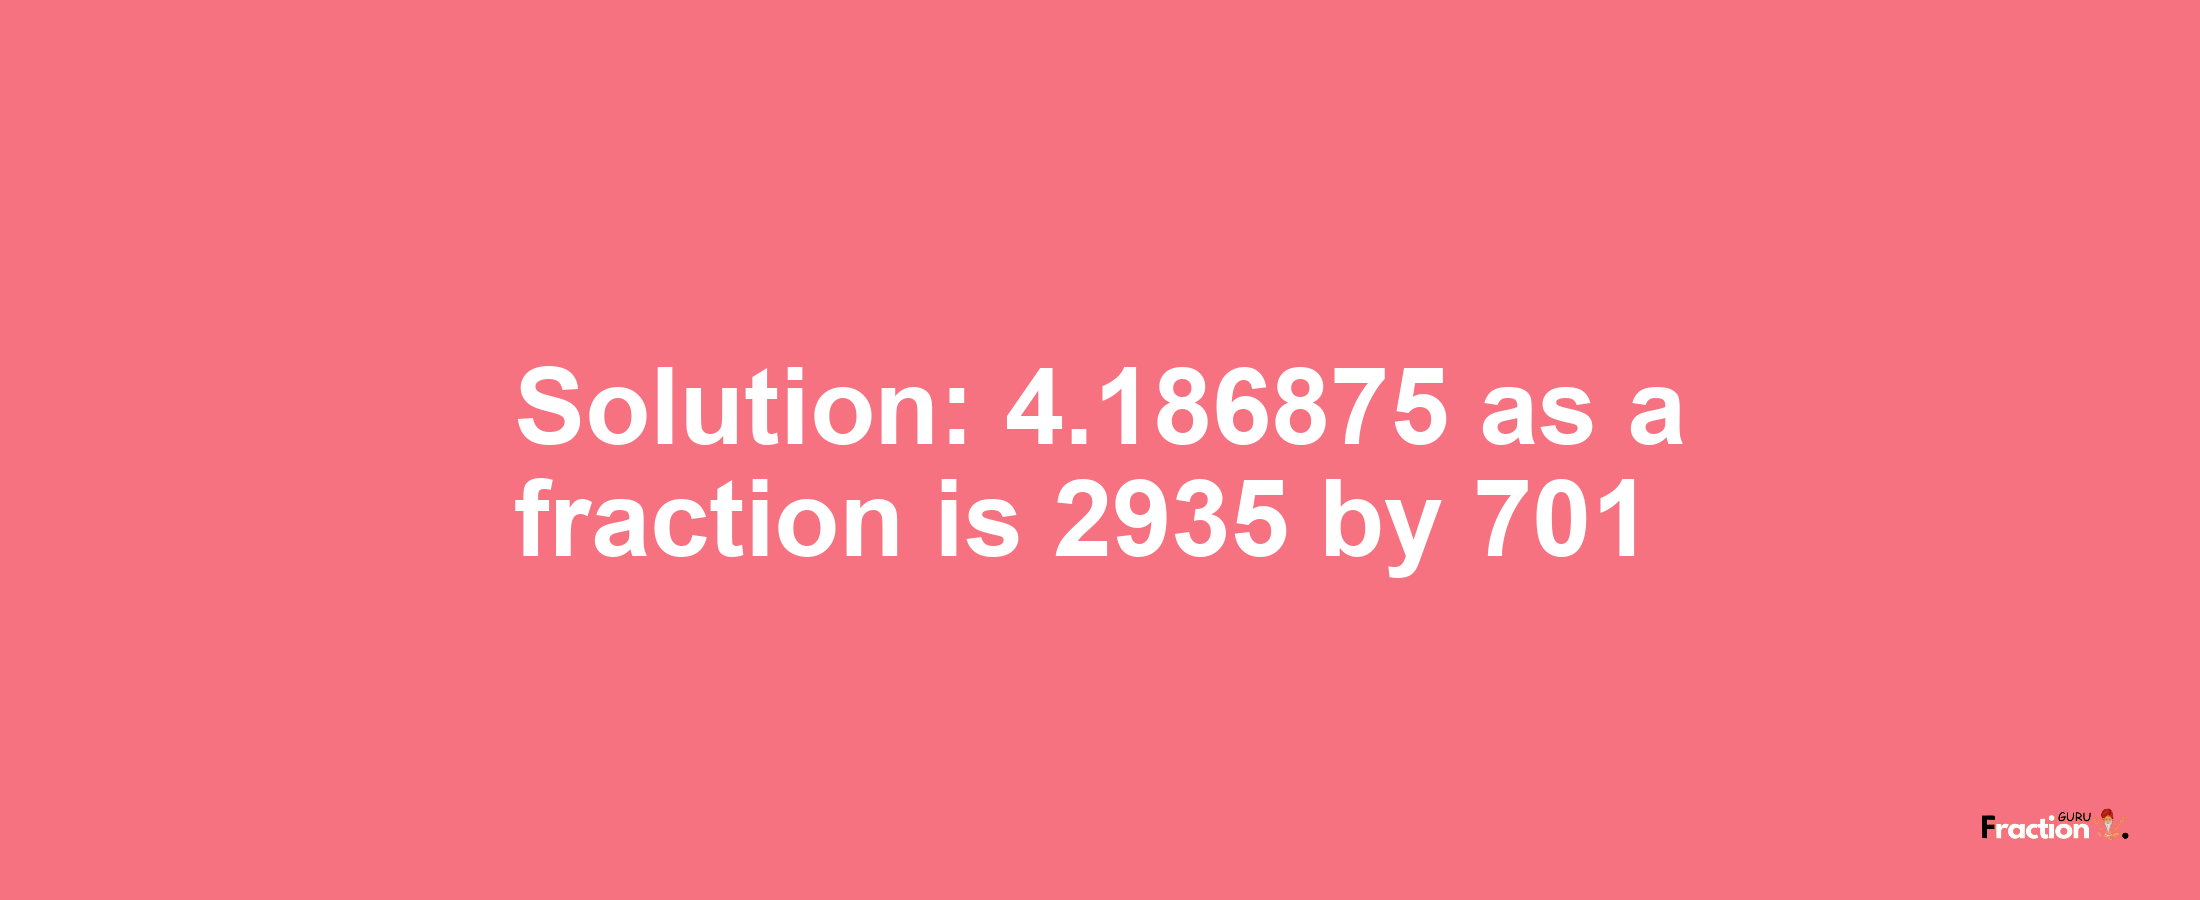 Solution:4.186875 as a fraction is 2935/701